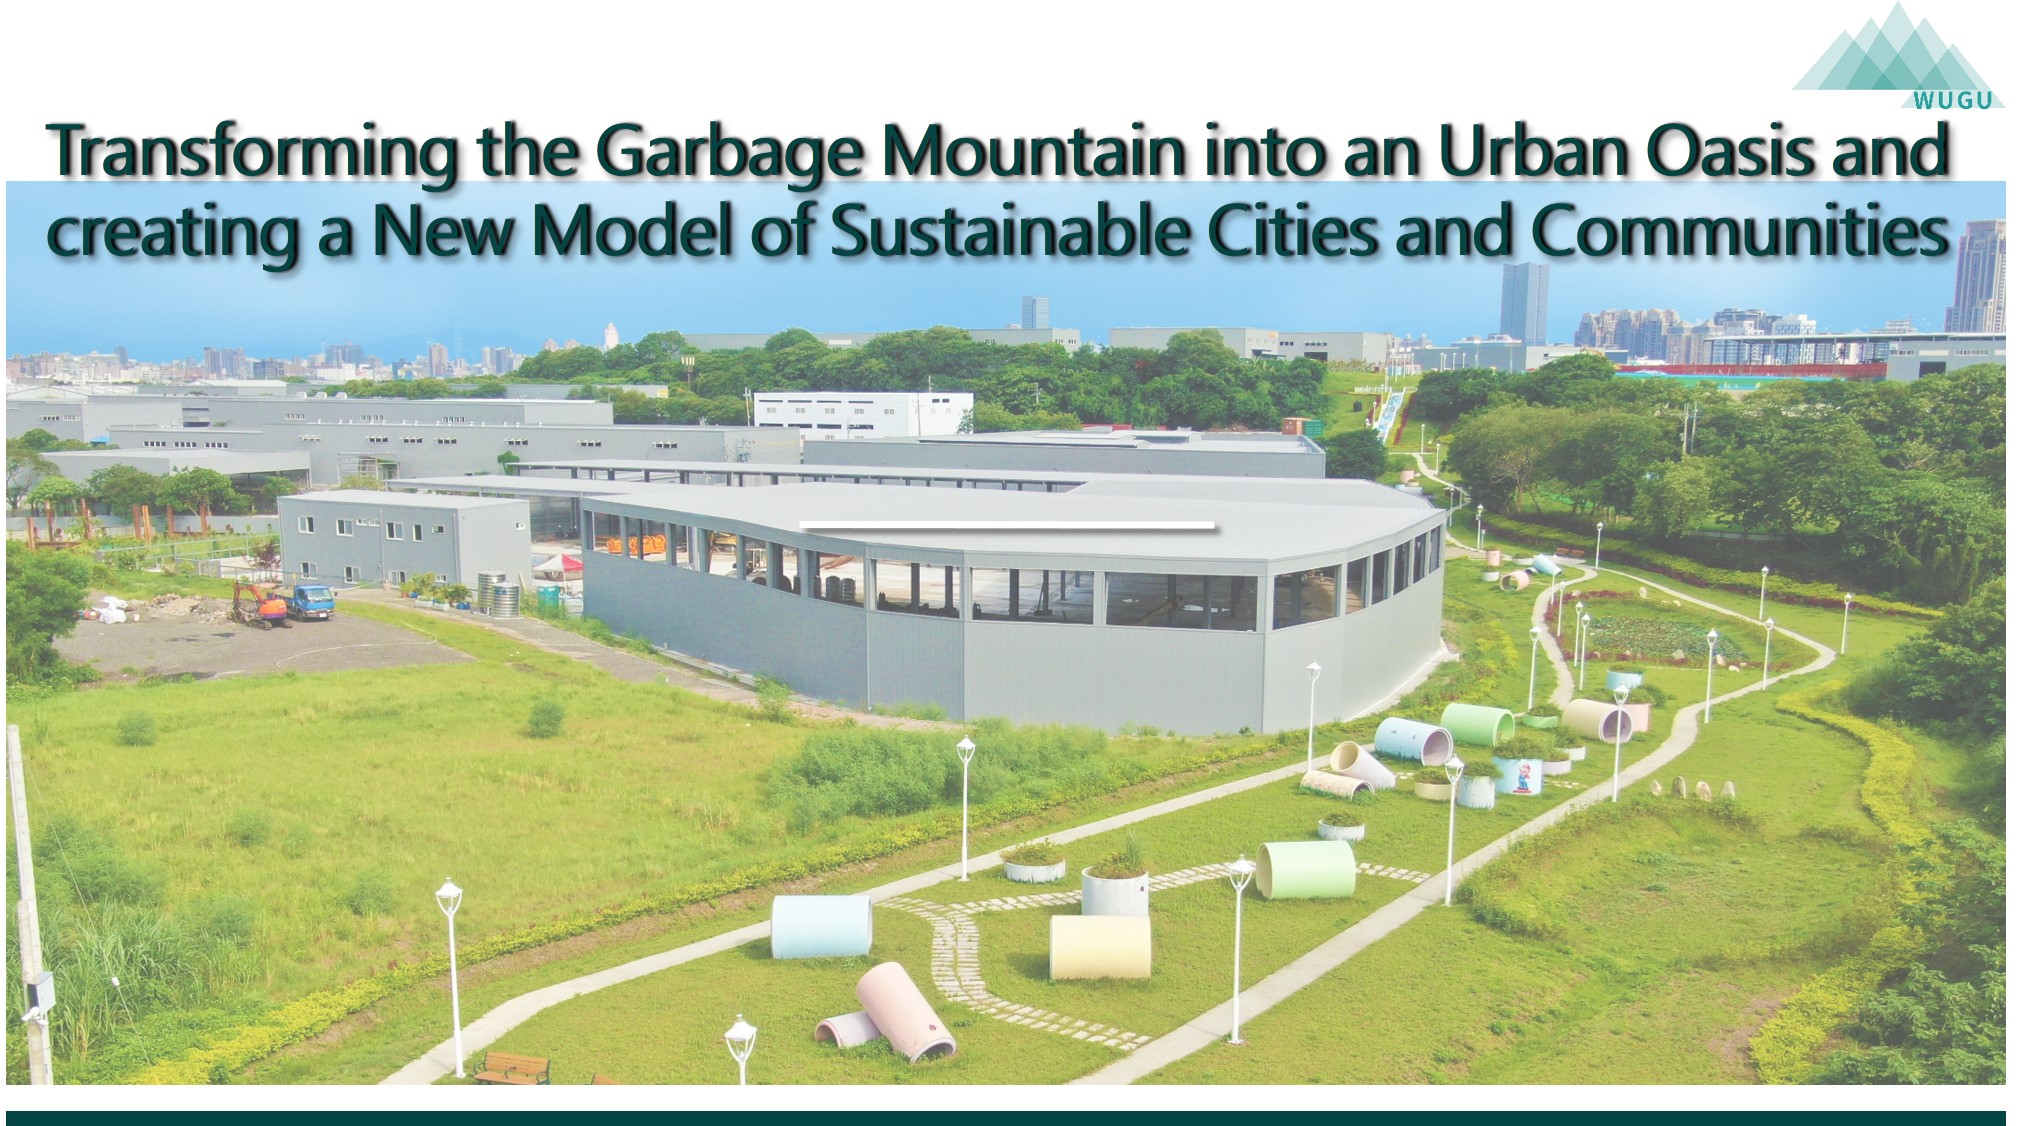 Transforming the Garbage Mountain into an Urban Oasis and creating a New Model of Sustainable Cities and Communities